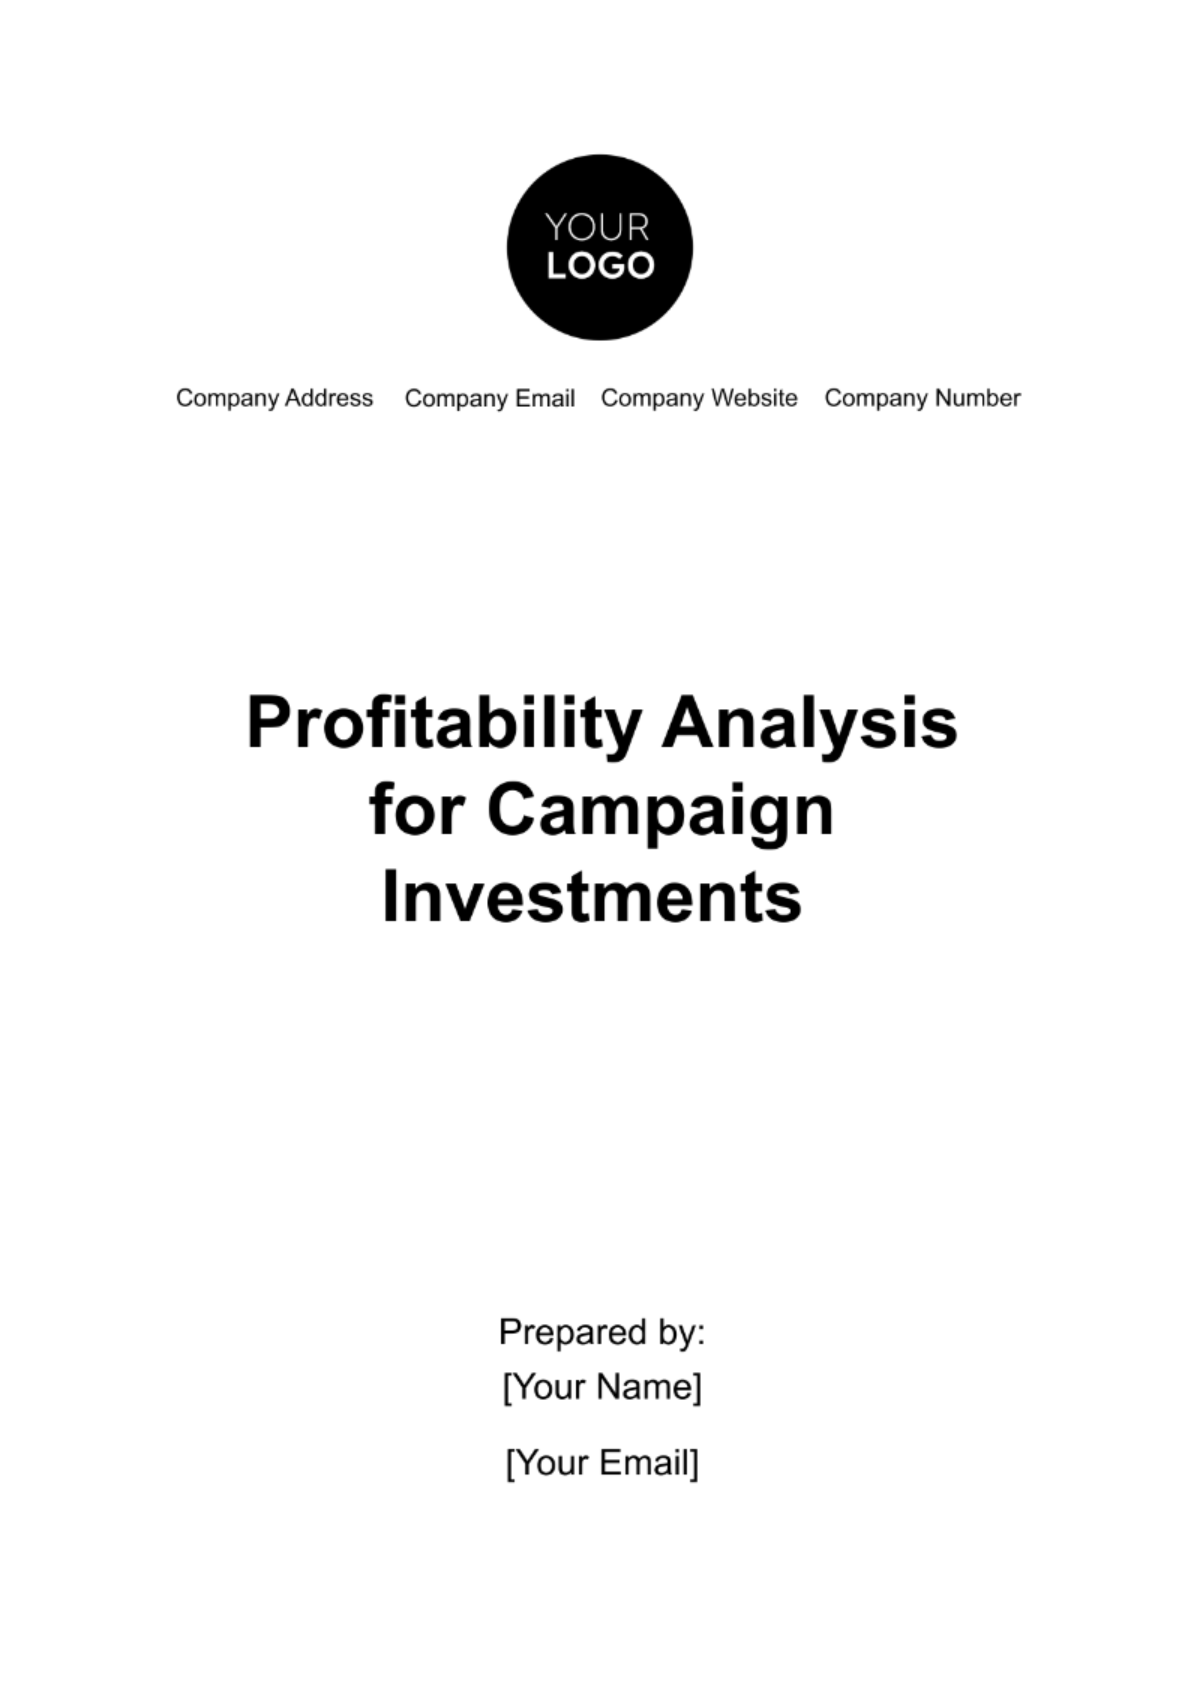 Free Profitability Analysis for Campaign Investments Template